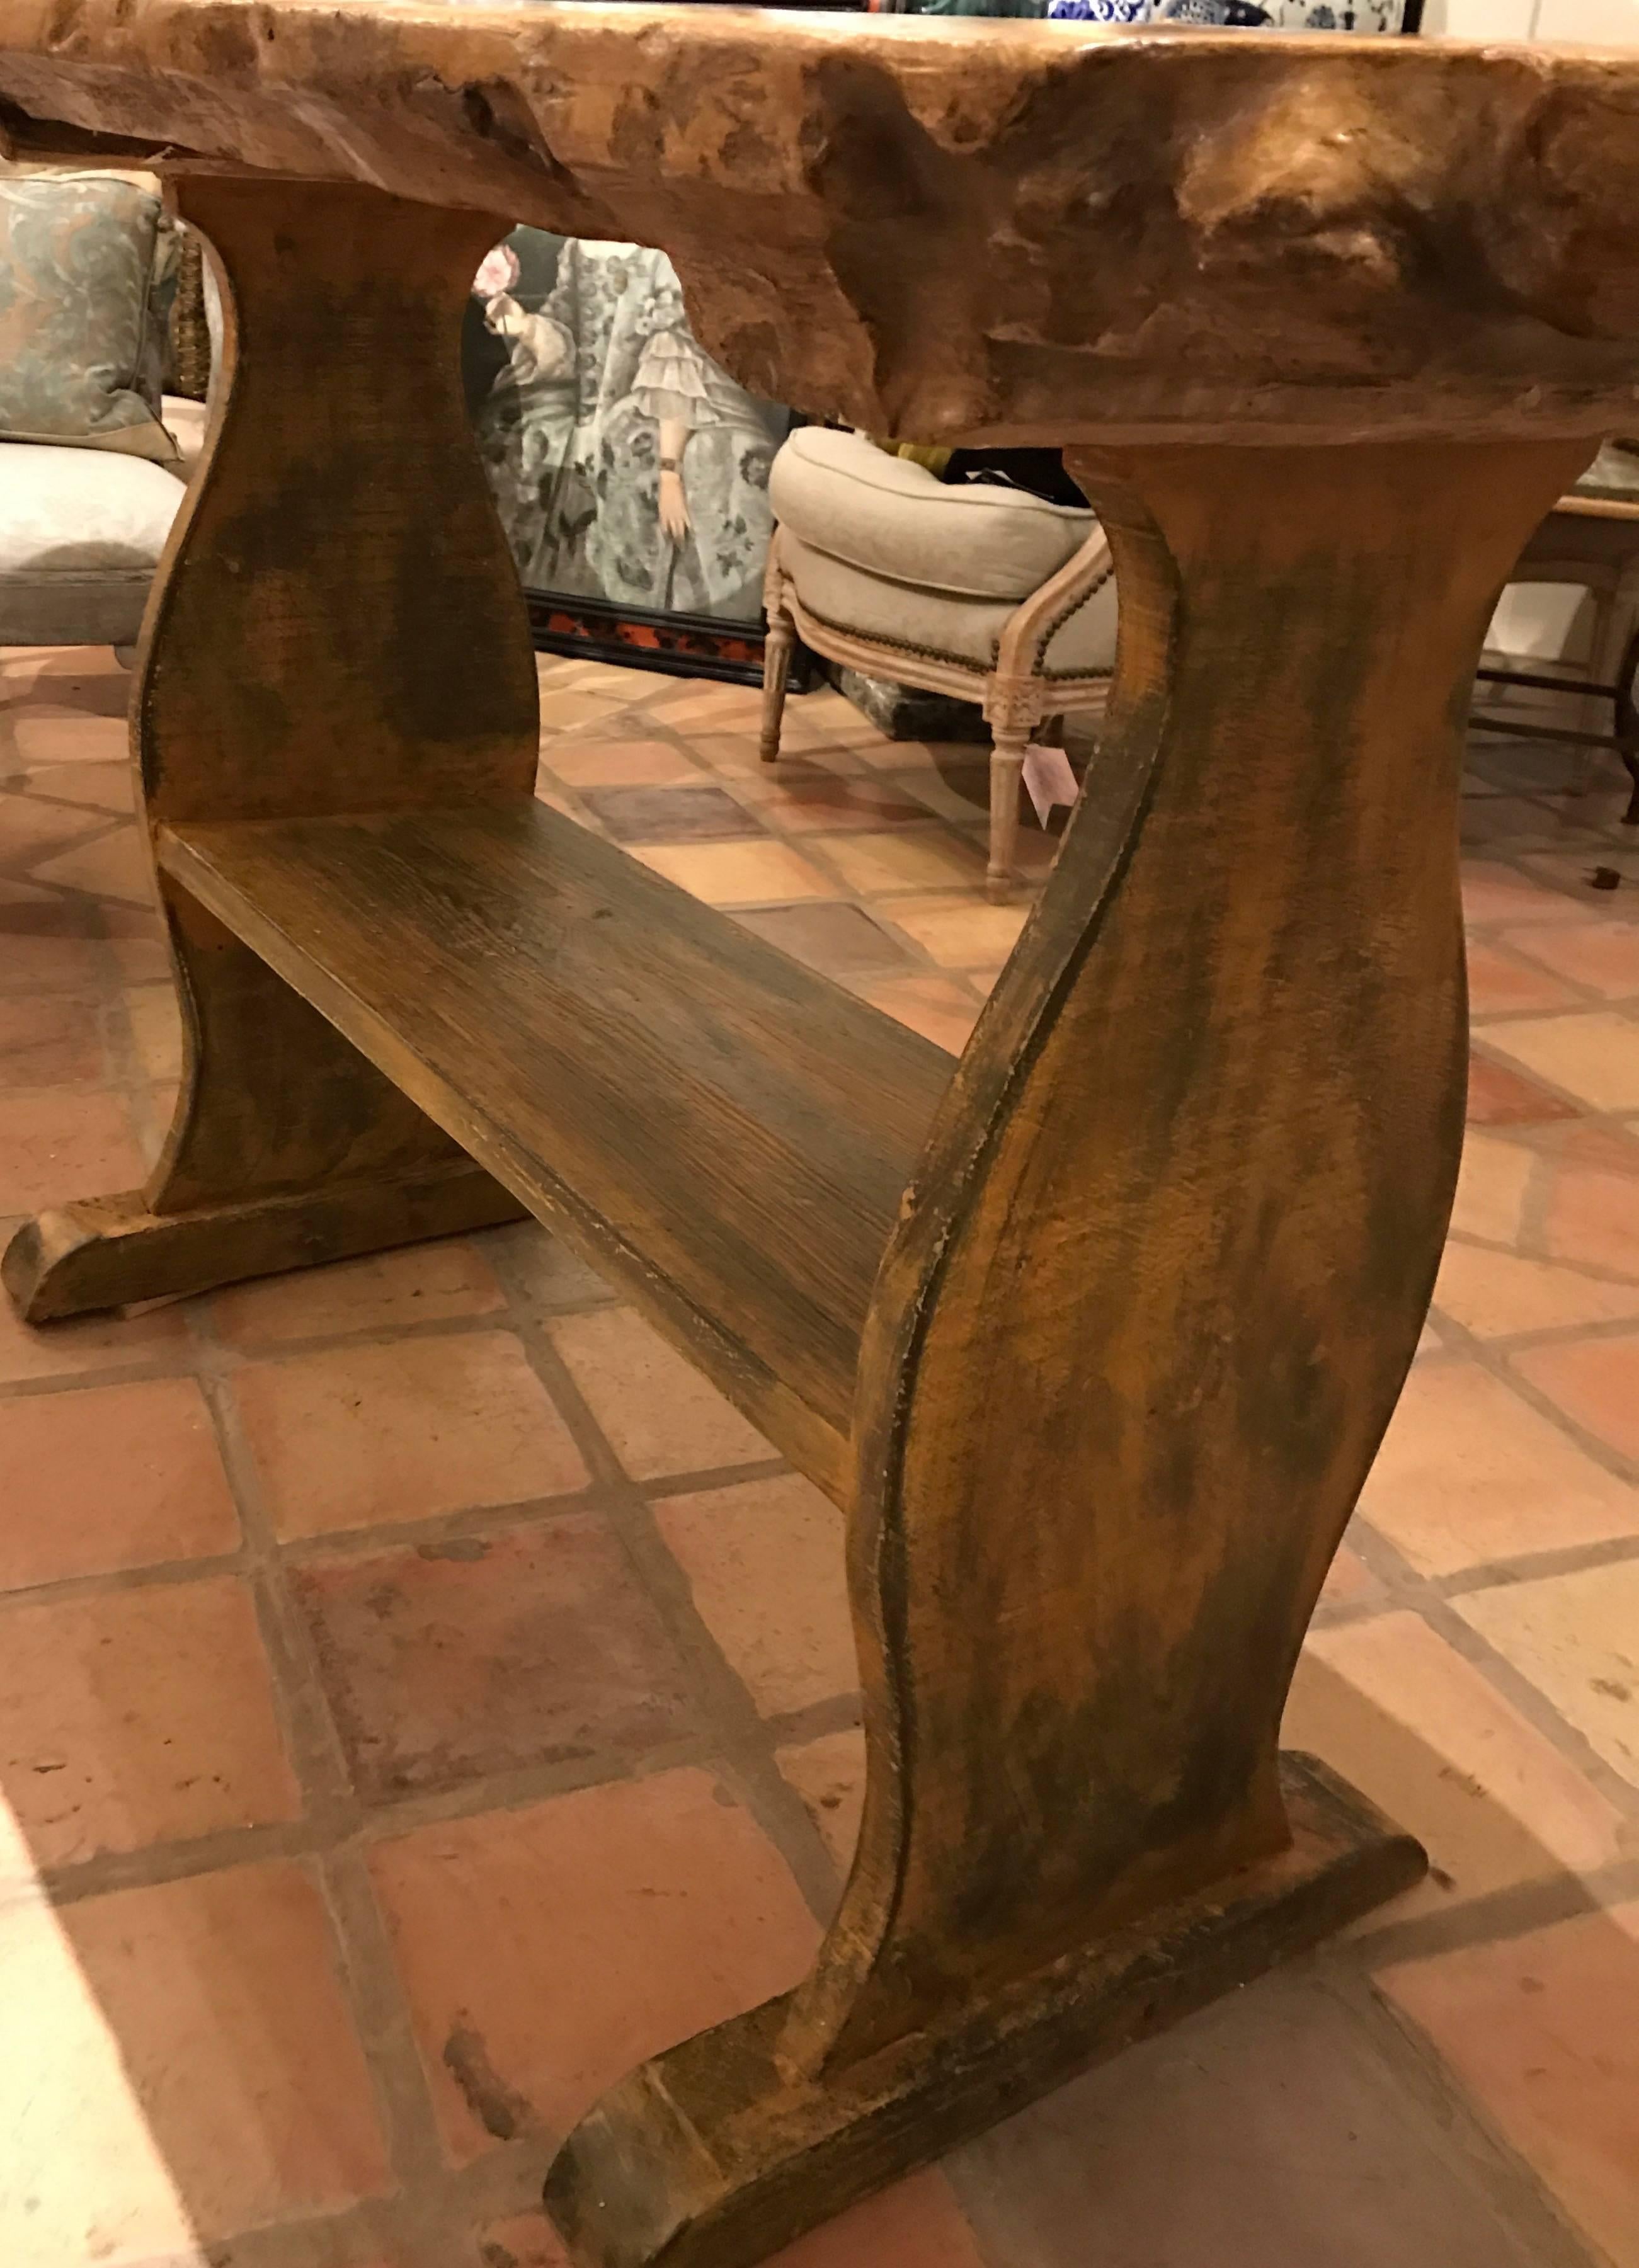 Early 19th century rustic “Basque” oval trestle table or console. Top made of a single very thick highly figured piece of burled ash with a wonderful color and rich patination. The simple trestle base with shelf made of pine retaining an old painted